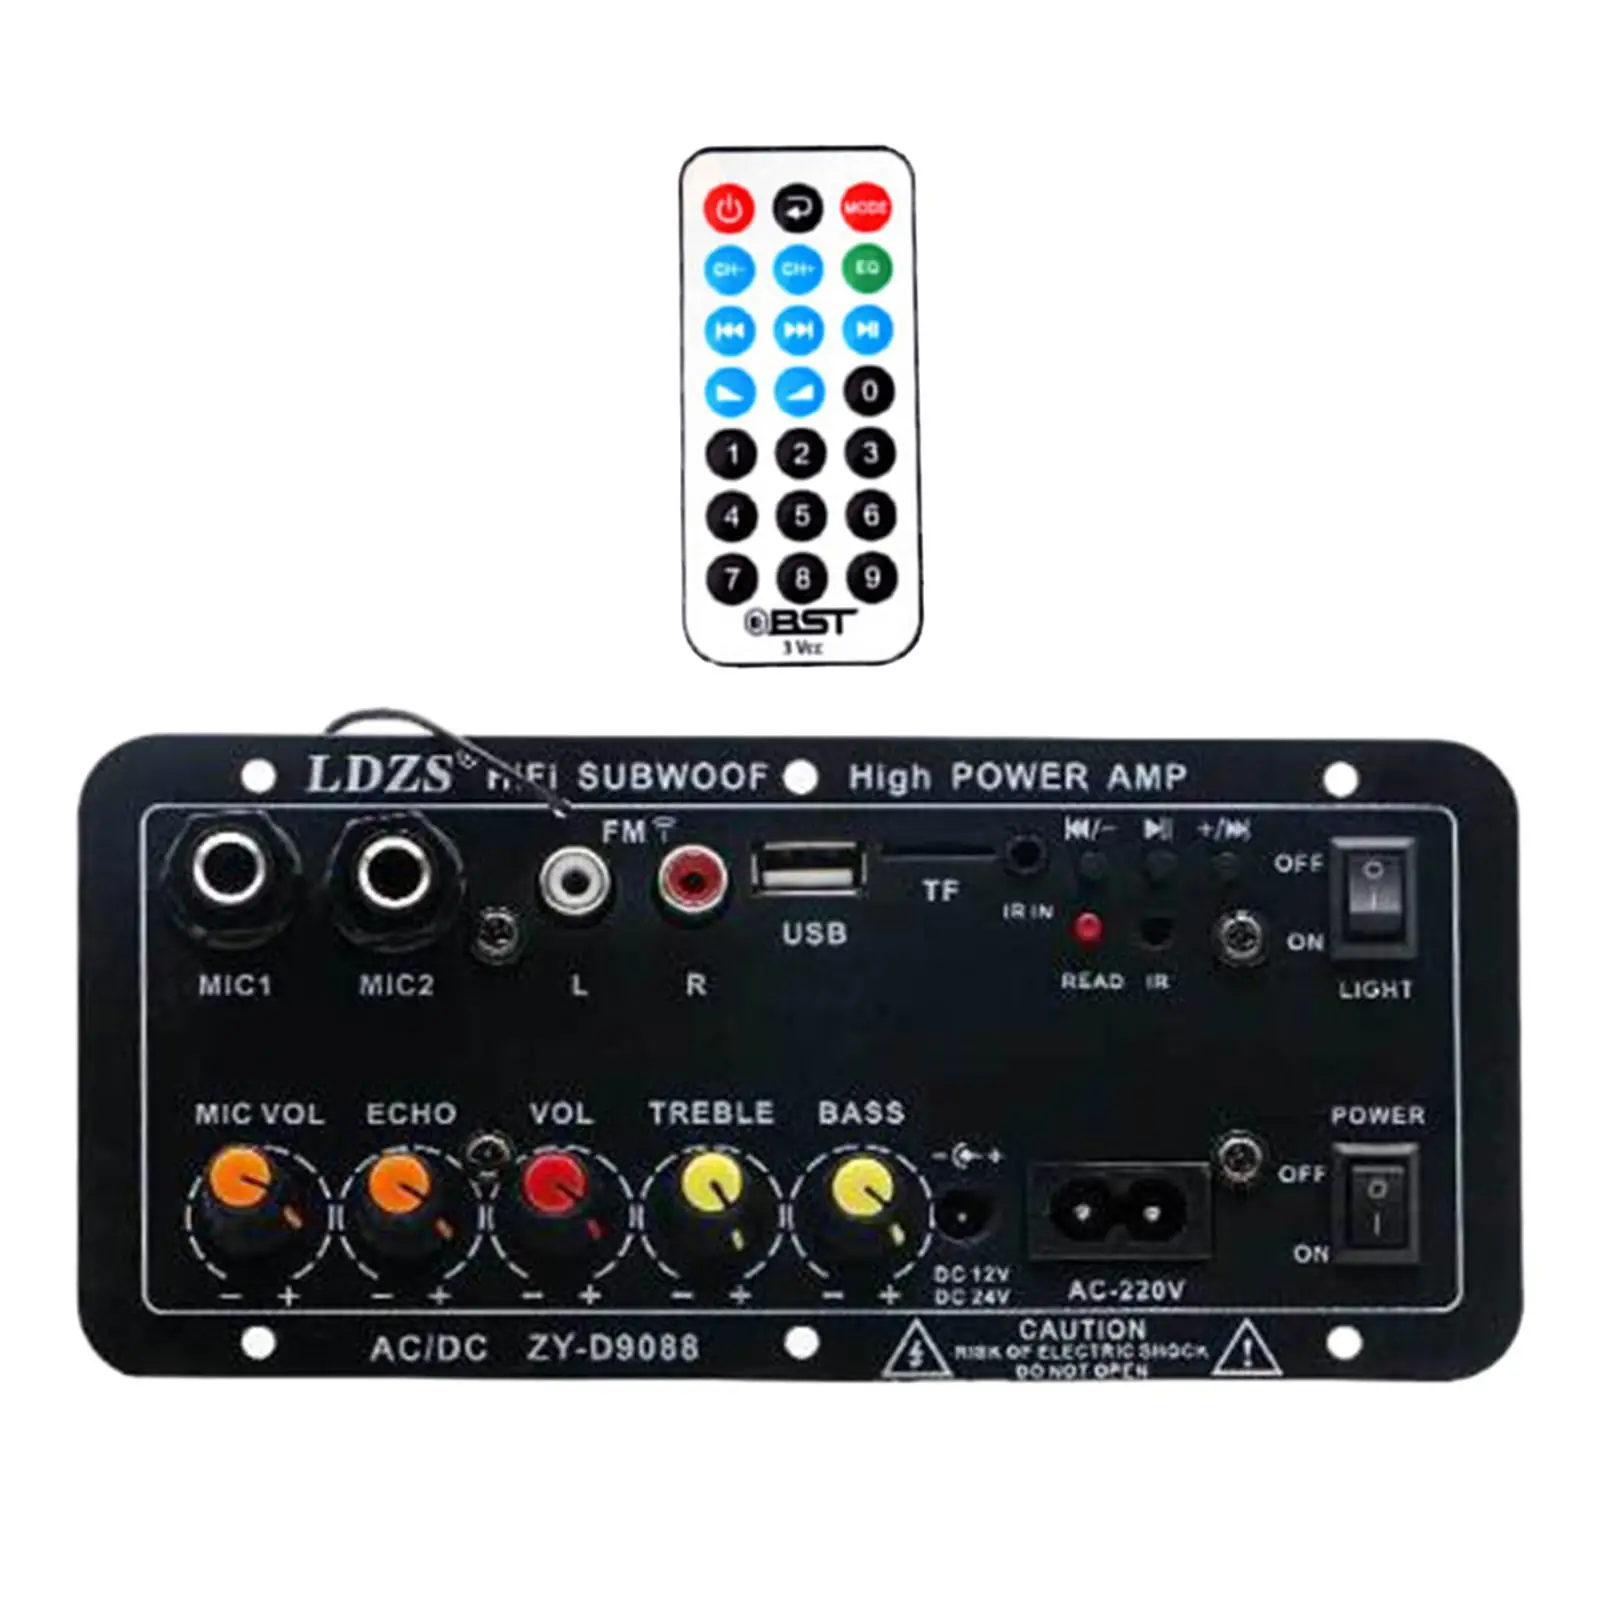 Microphone Karaoke Power Amplifier Board Professional Audio Mixer for Home Theater Desktop Computers Laptops Motorcycles Cars